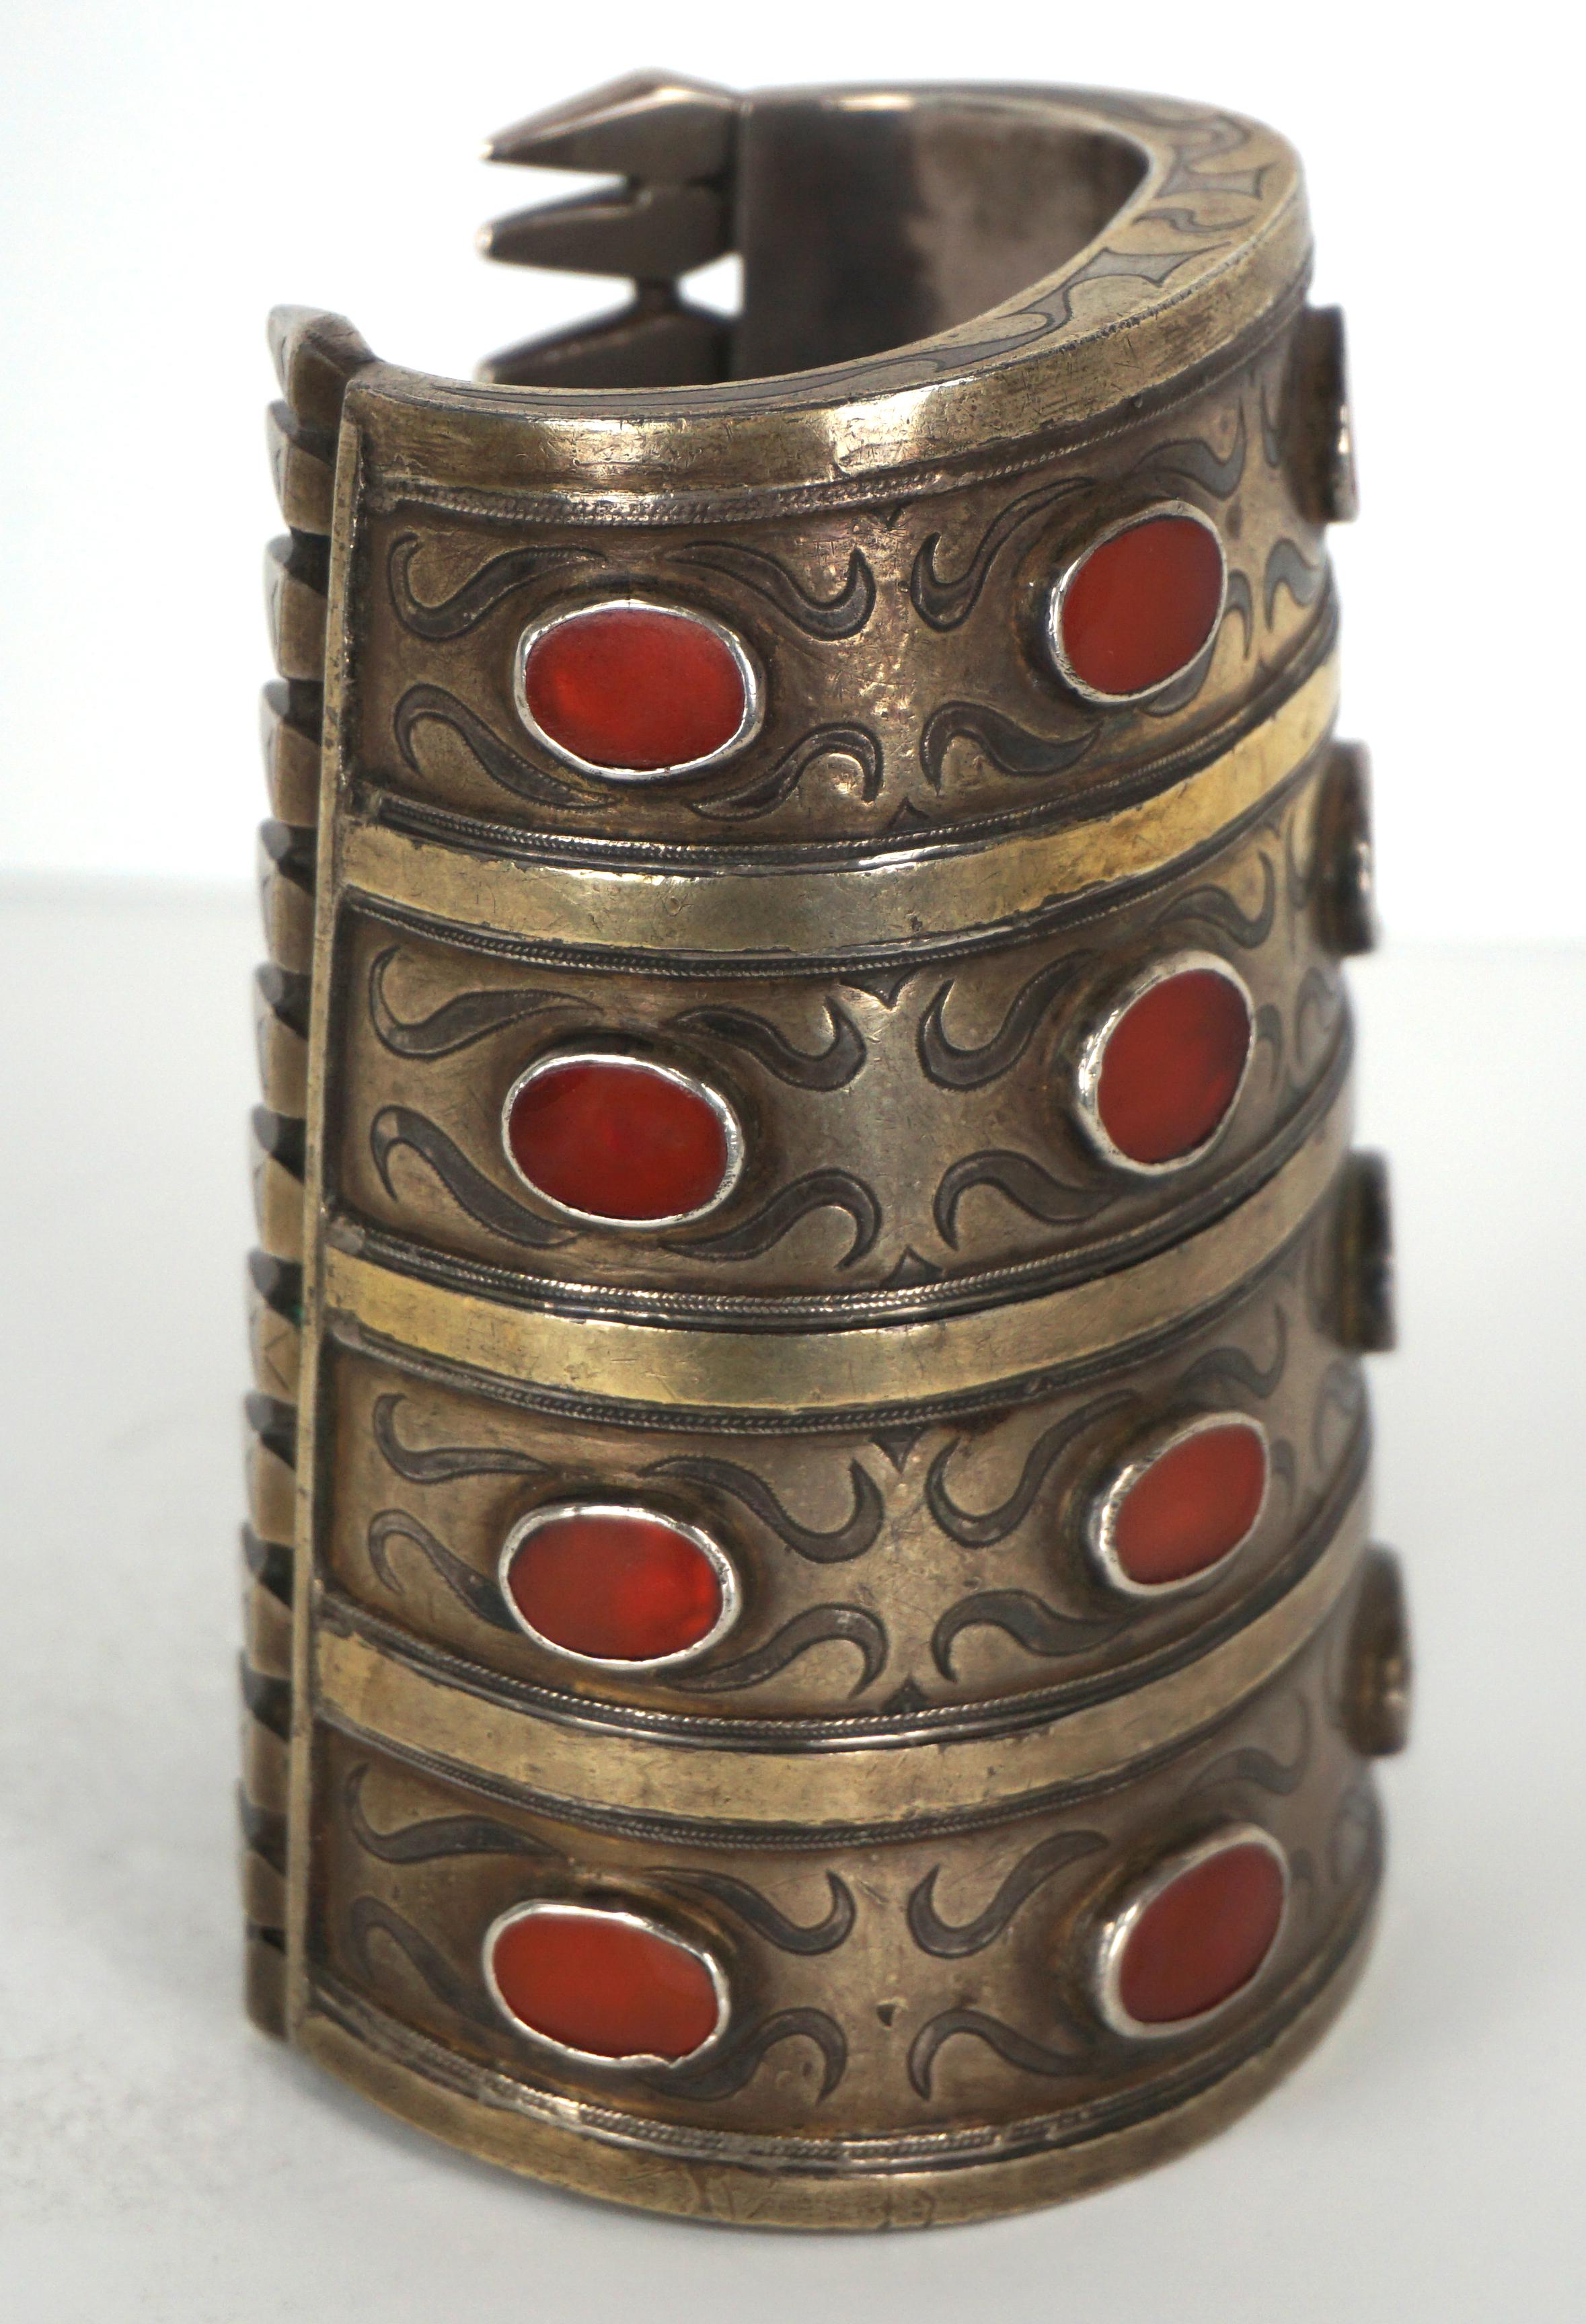 Beautiful Tekke/Turkmen cuff/armlet armlet, known as bilezik, is decorated with four rows of table-cut semi-precious Carnelians. The cuff is for a small boned person (internal diameter at smallest point is 2